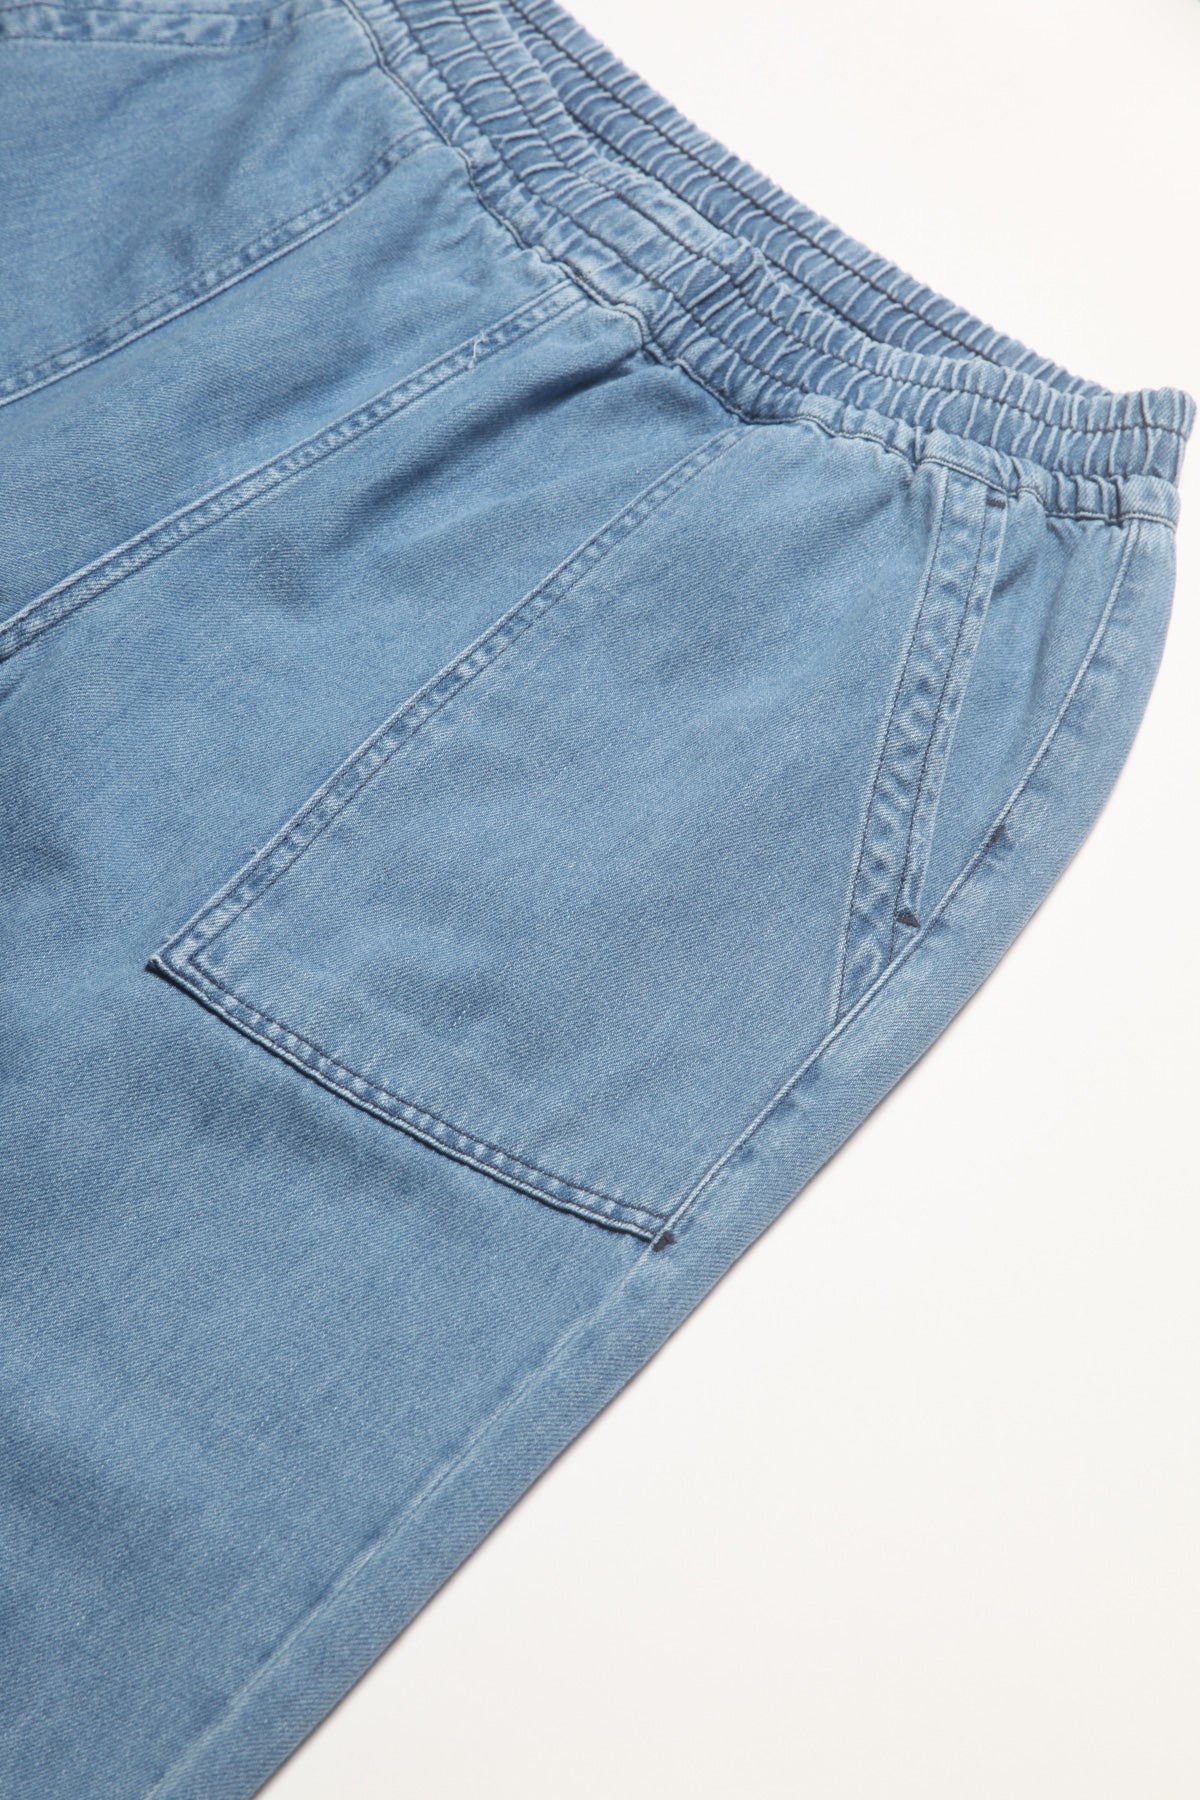 Service Works - Classic Chef Pants - Light Washed Denim